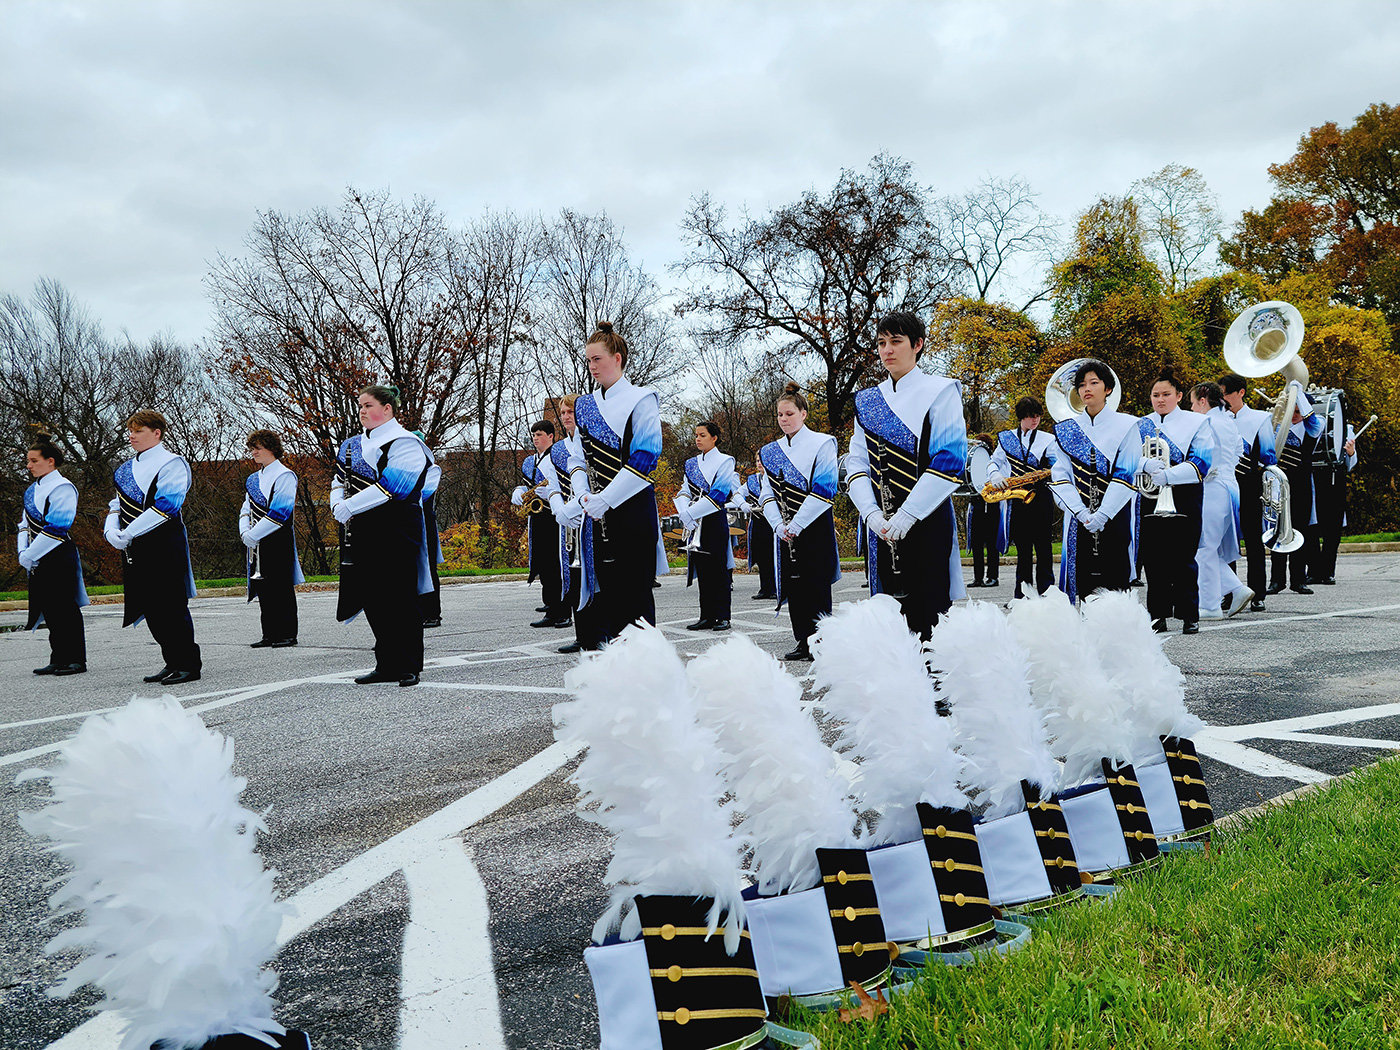 Members of the Severna Park High School Falcon band waited for instructions during warmups at the Maryland Marching Band Association state championships in November.